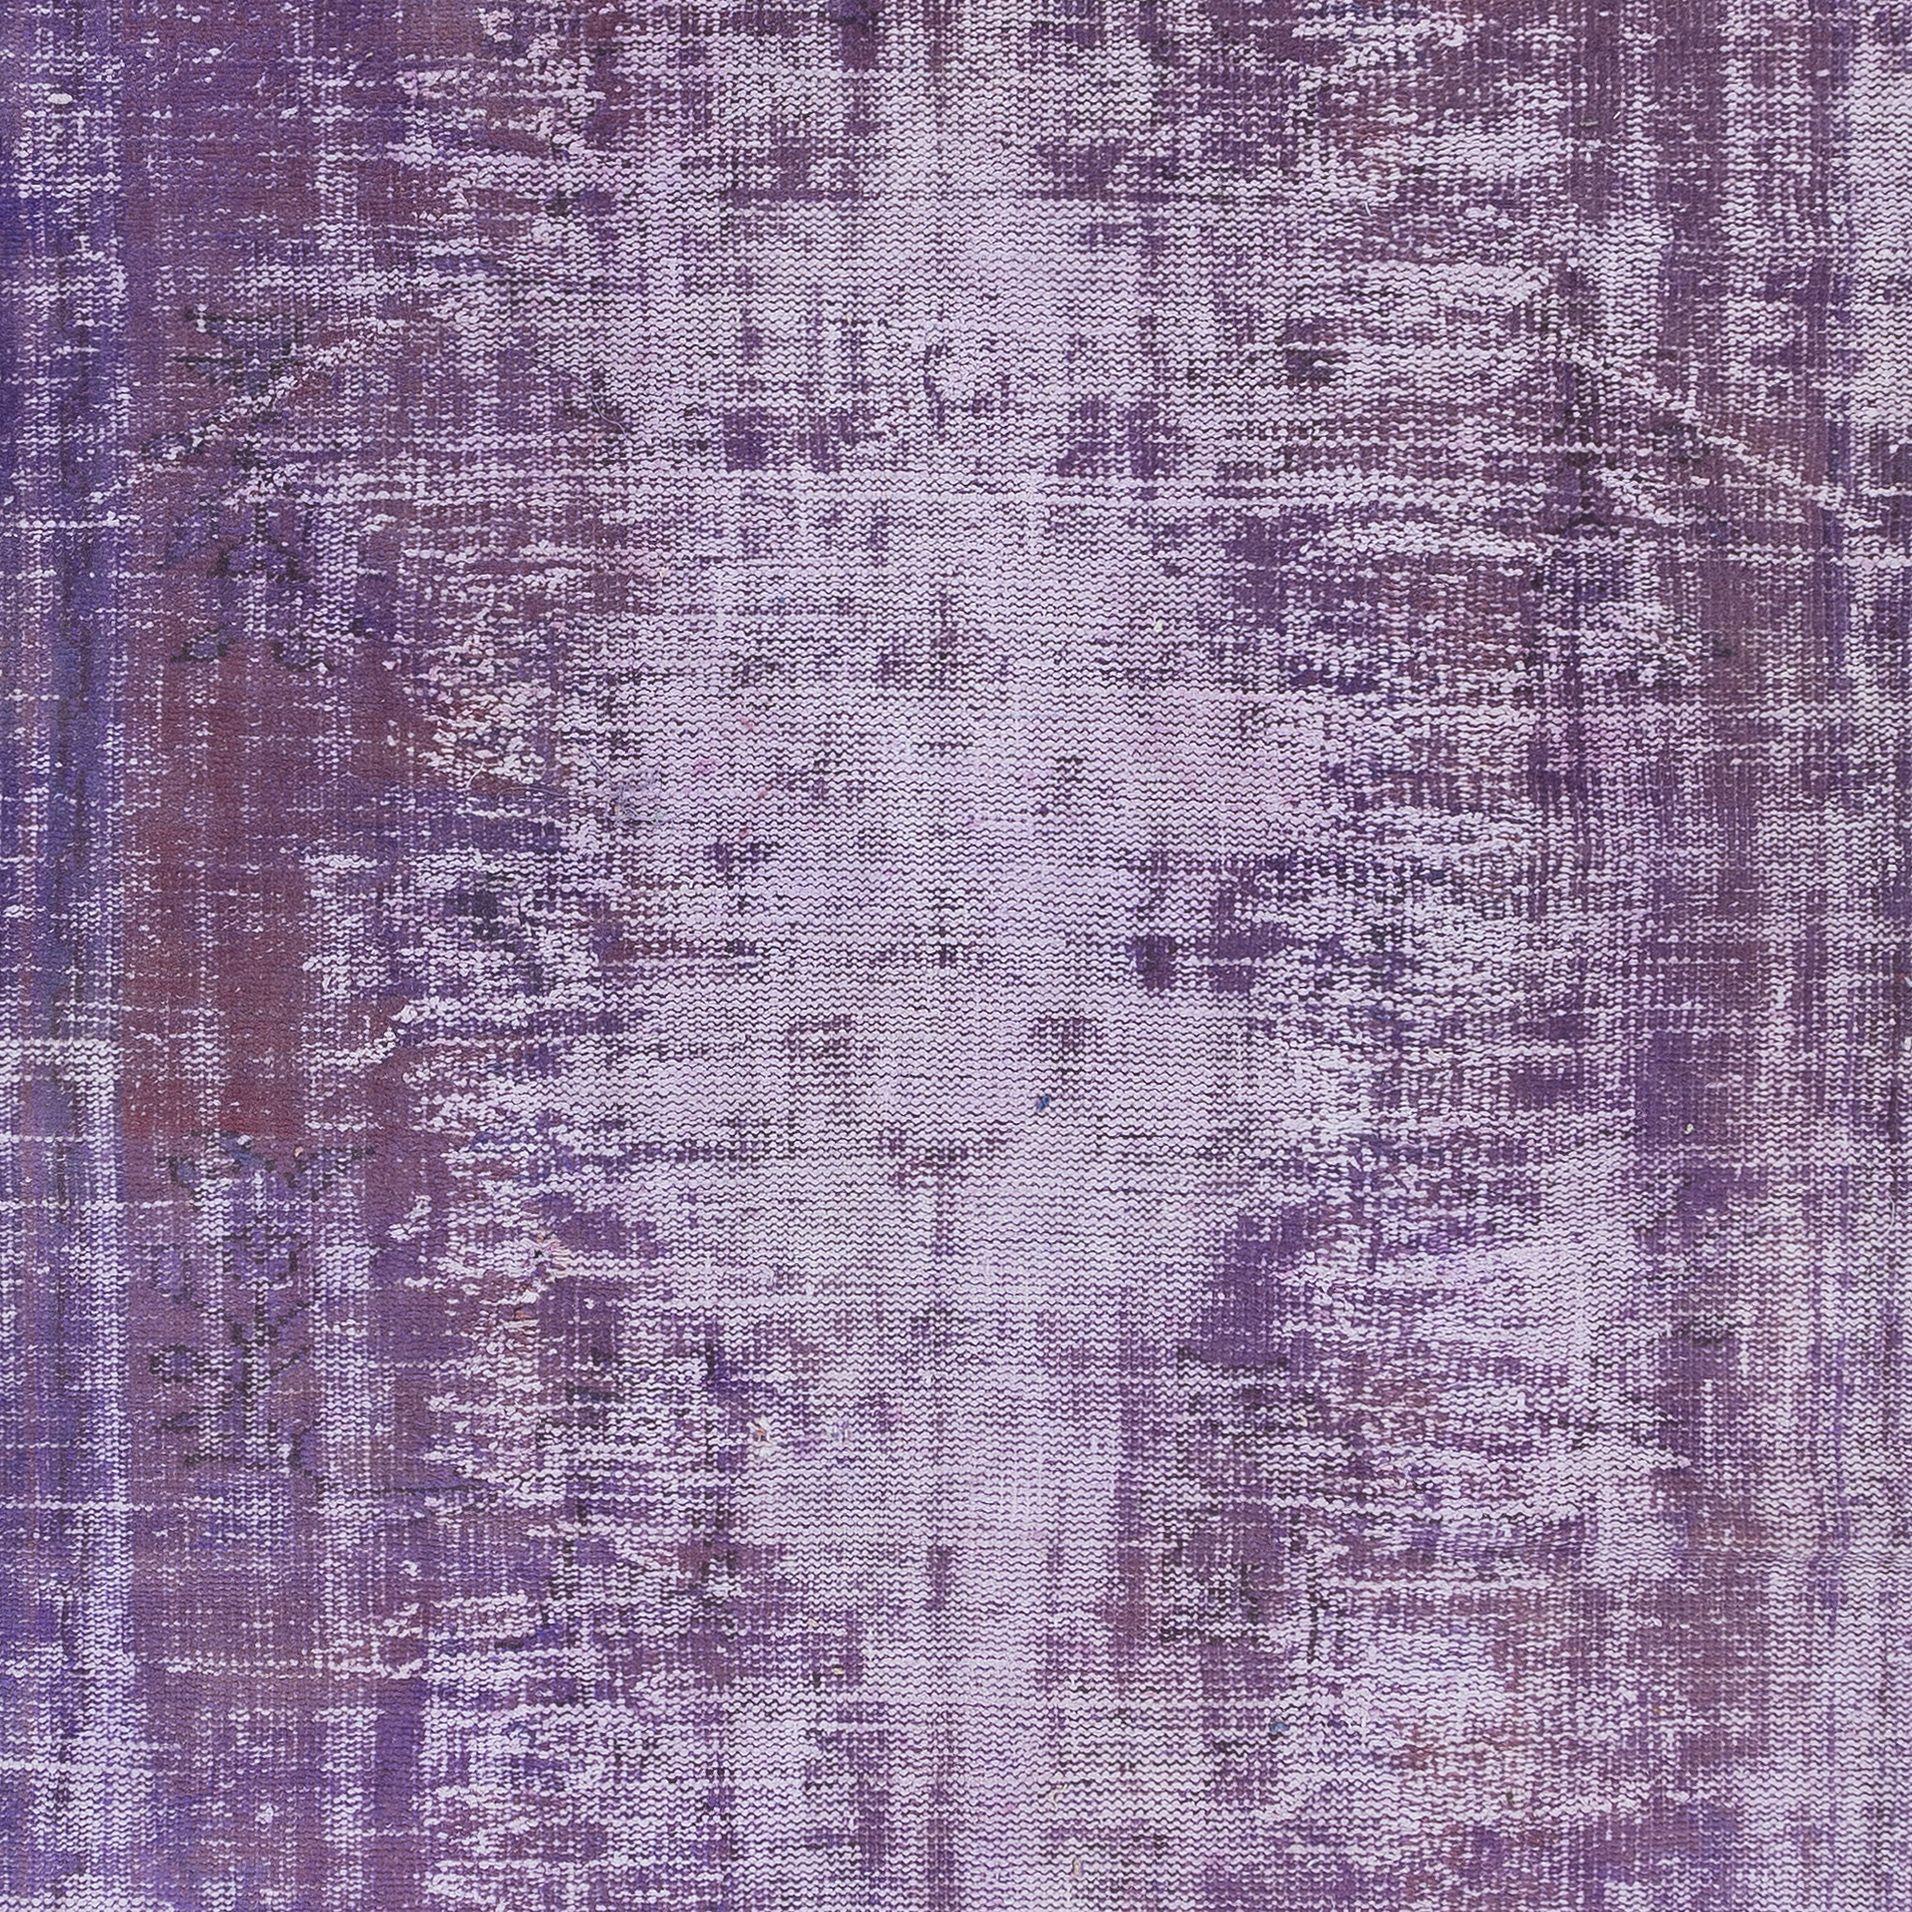 Modern 5.5x8.4 Ft Rustic Handmade Distressed Turkish Sparta Area Rug in Orchid Purple For Sale